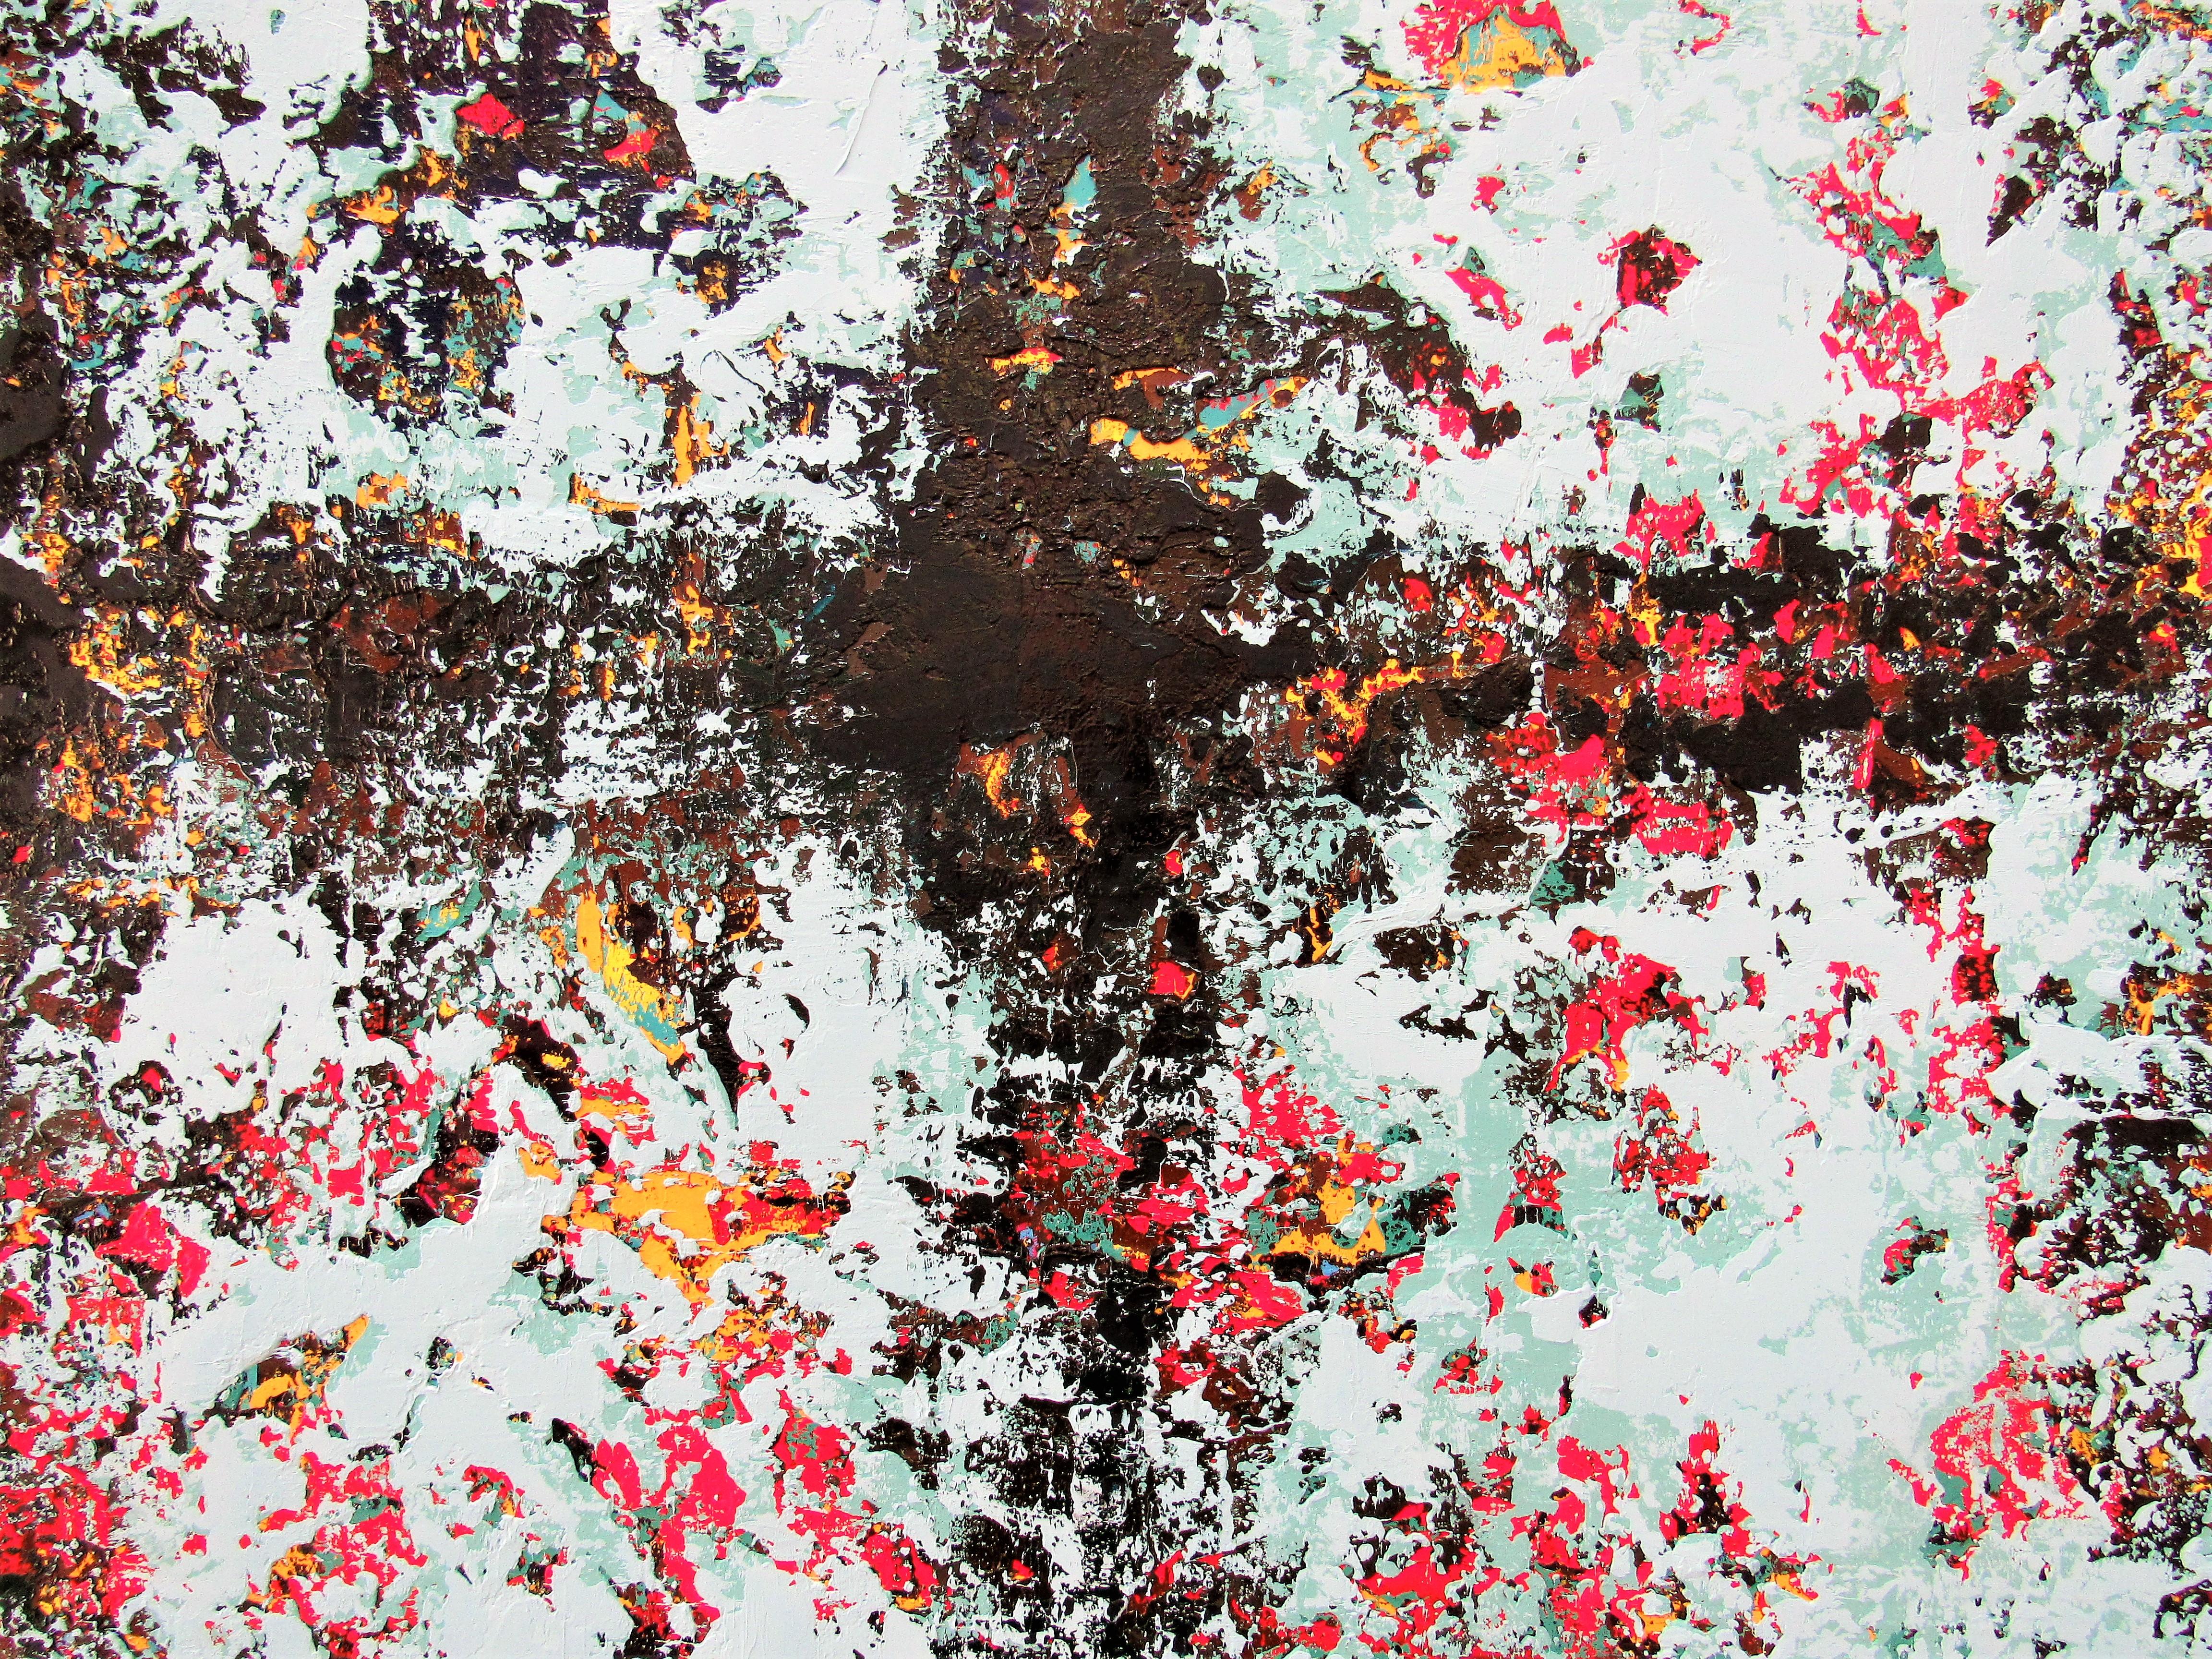 Ending - Contemporary Abstract Art: Deeply Textured Oil Paint on Canvas - Painting by Brian Neish